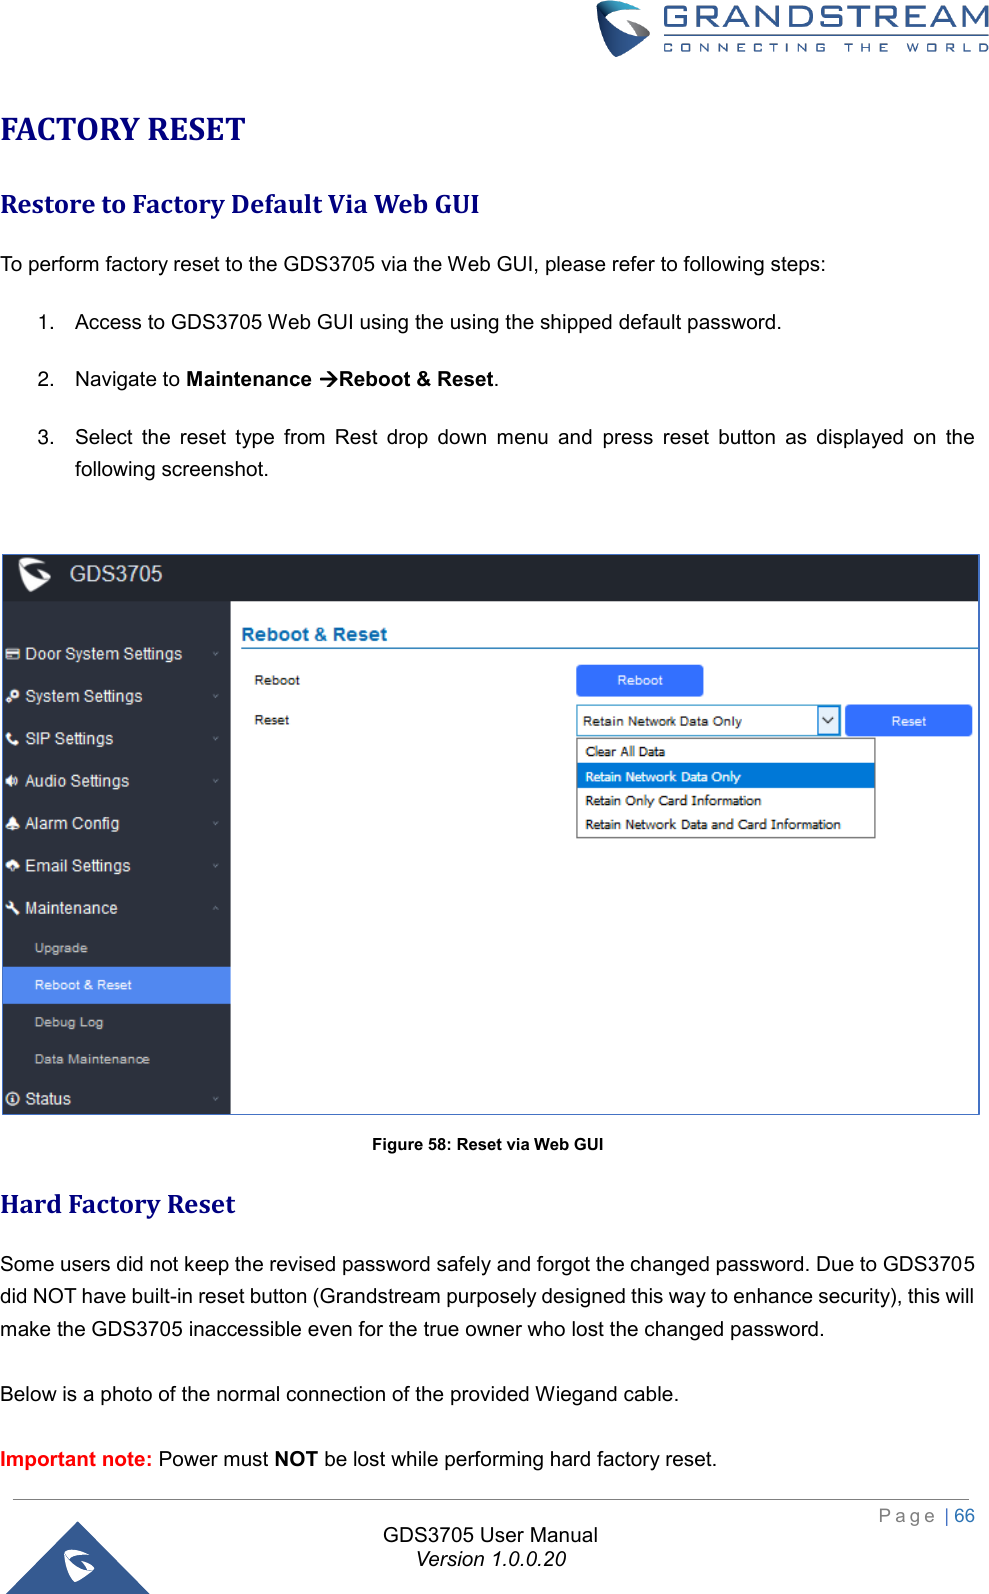                                                                         P a g e  | 66  GDS3705 User Manual Version 1.0.0.20 FACTORY RESET Restore to Factory Default Via Web GUI To perform factory reset to the GDS3705 via the Web GUI, please refer to following steps:  1. Access to GDS3705 Web GUI using the using the shipped default password. 2. Navigate to Maintenance Reboot &amp; Reset. 3. Select  the  reset  type  from  Rest  drop  down  menu  and  press  reset  button  as  displayed  on  the following screenshot.   Figure 58: Reset via Web GUI Hard Factory Reset Some users did not keep the revised password safely and forgot the changed password. Due to GDS3705 did NOT have built-in reset button (Grandstream purposely designed this way to enhance security), this will make the GDS3705 inaccessible even for the true owner who lost the changed password.   Below is a photo of the normal connection of the provided Wiegand cable.  Important note: Power must NOT be lost while performing hard factory reset. 